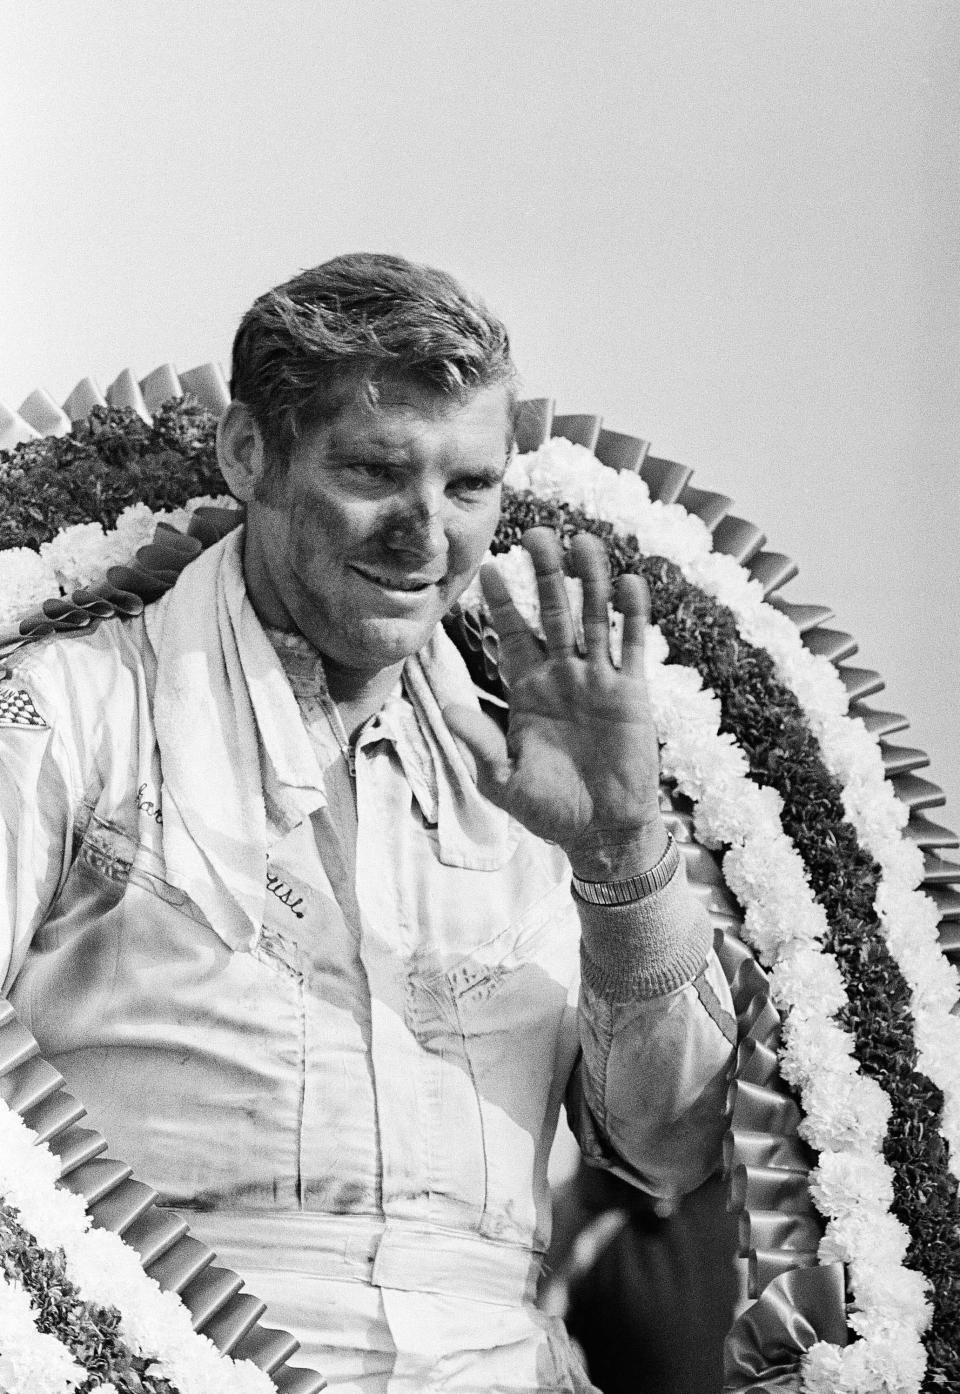 Richard Brickhouse of Rocky Point, North Carolina, waves after getting his trophy and horseshoe of flowers in Victory Lane at Alabama International Raceway after winning the Talladega 500,